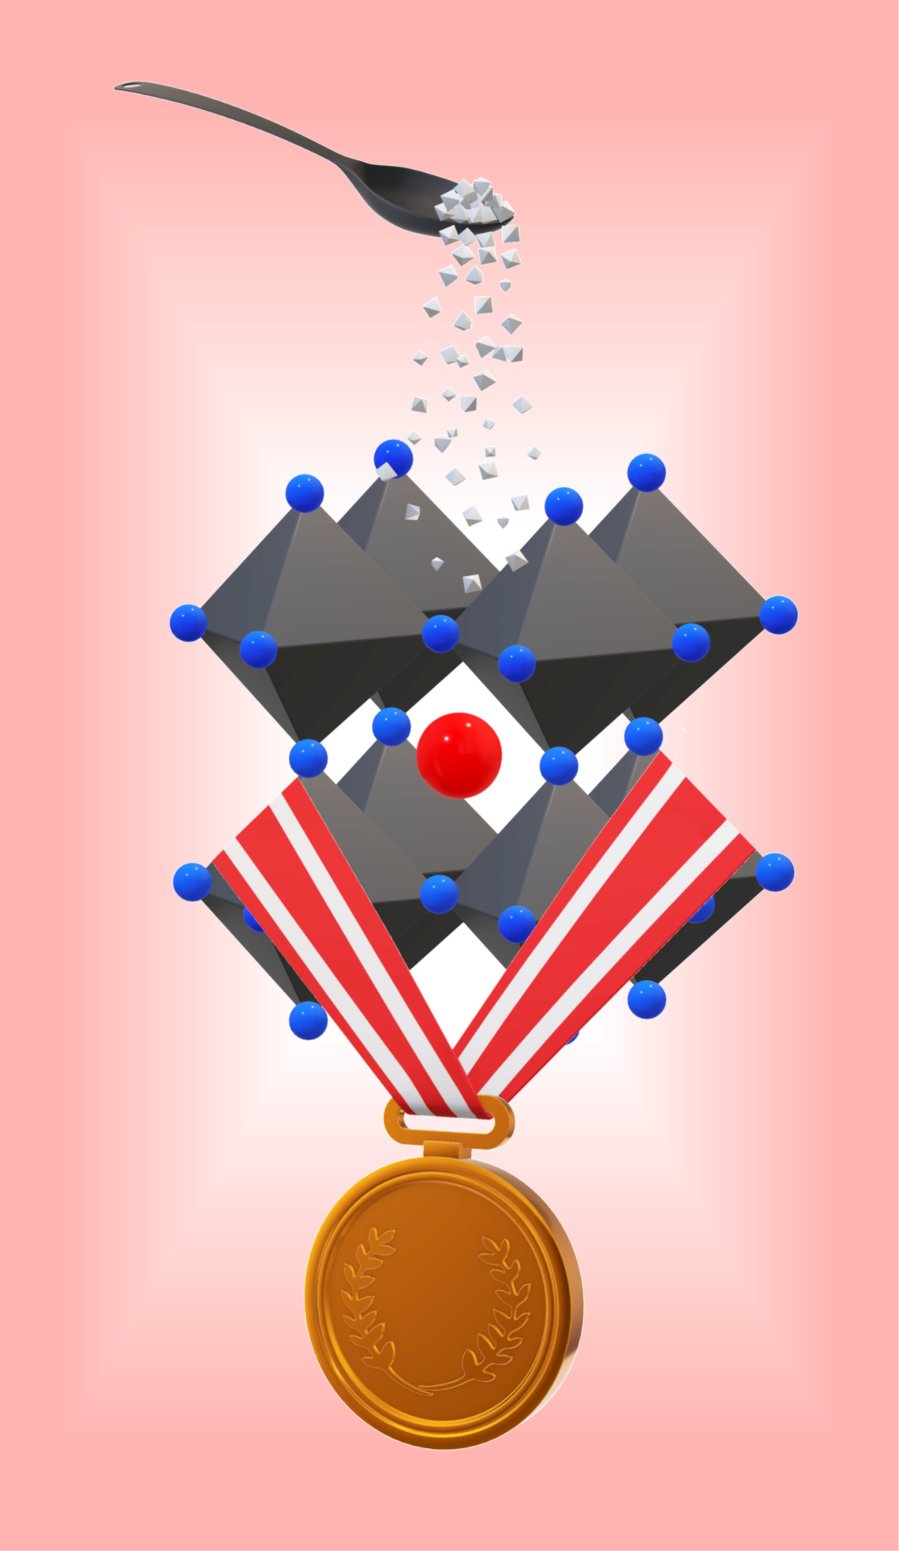 graphic depicting perovskite crystals and a gold medal